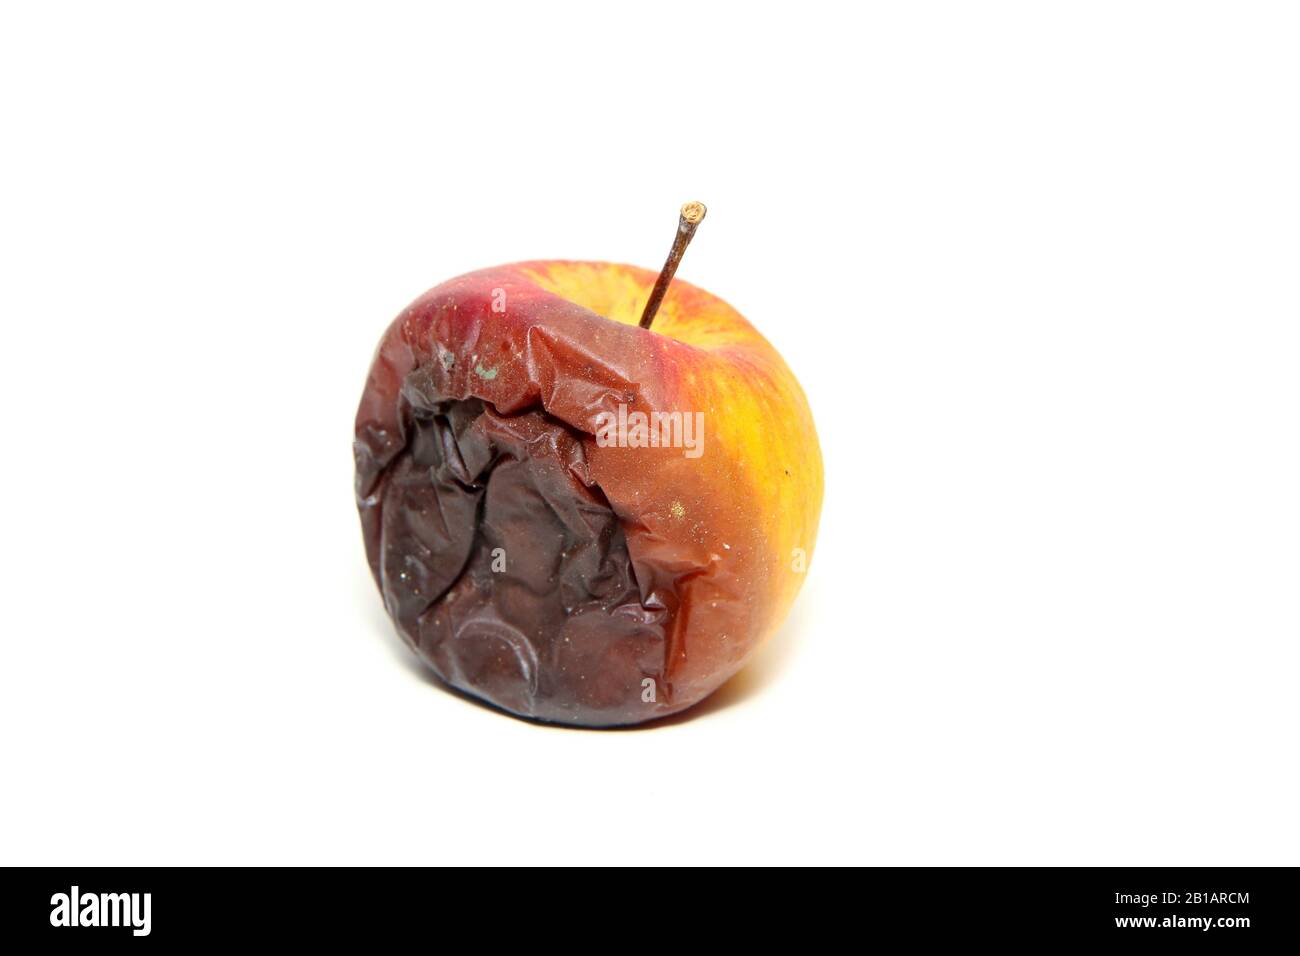 One rotten and uneatable apple. Isolated on a white background. Stock Photo